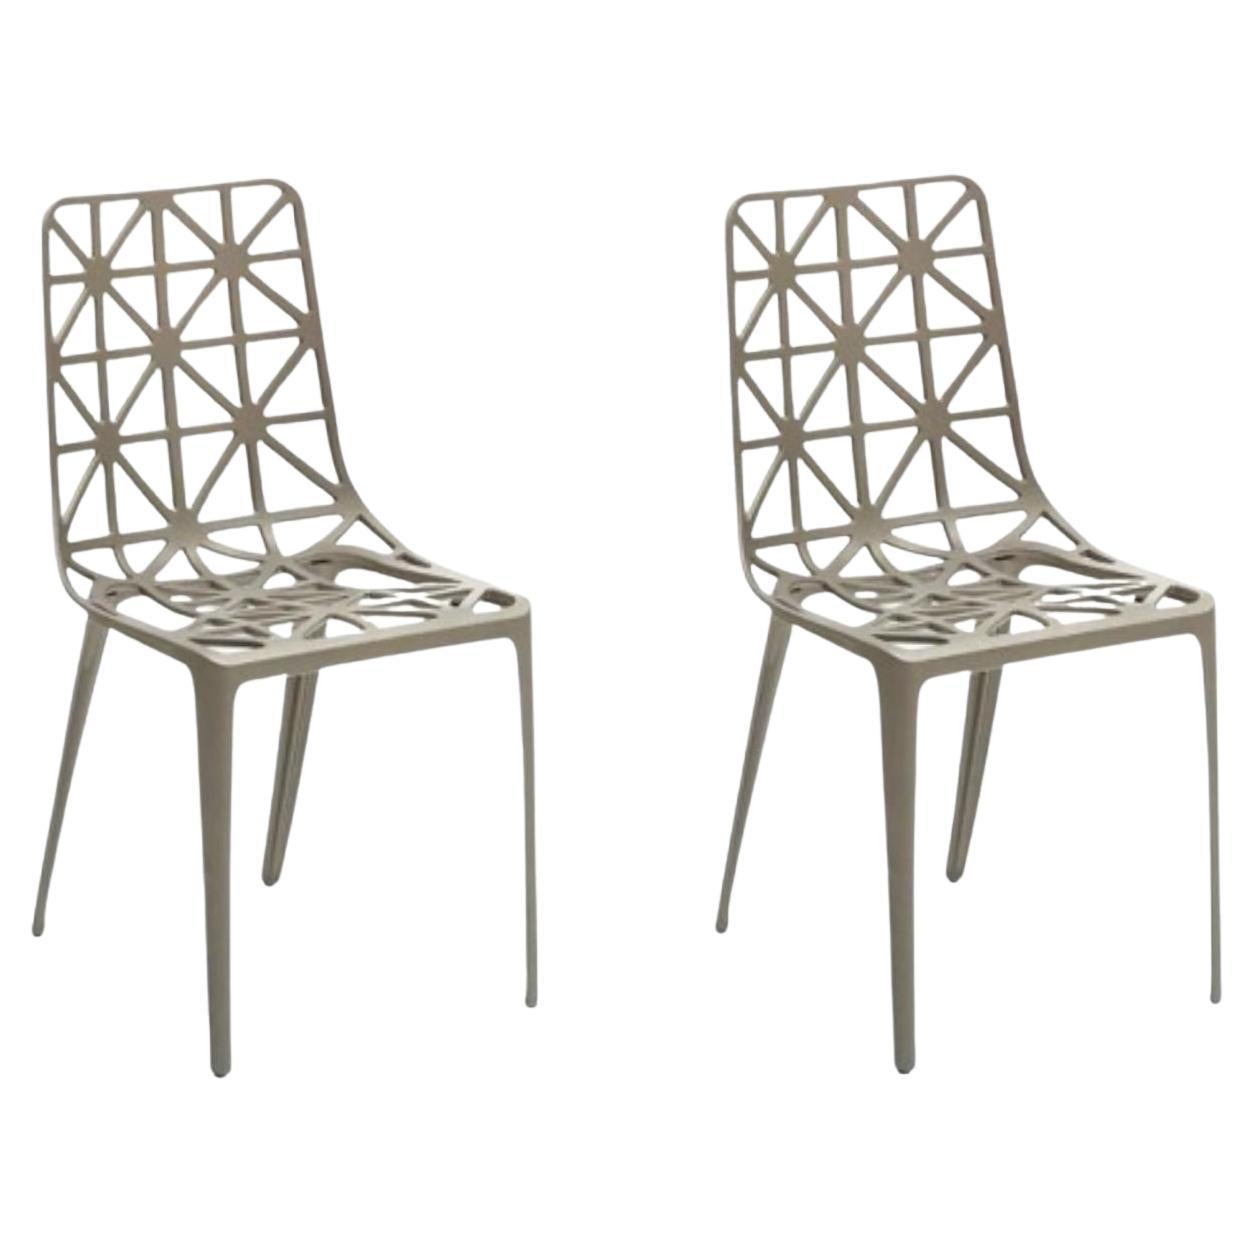 Set of 2 New Eiffel Tower Chairs by Alain Moatti